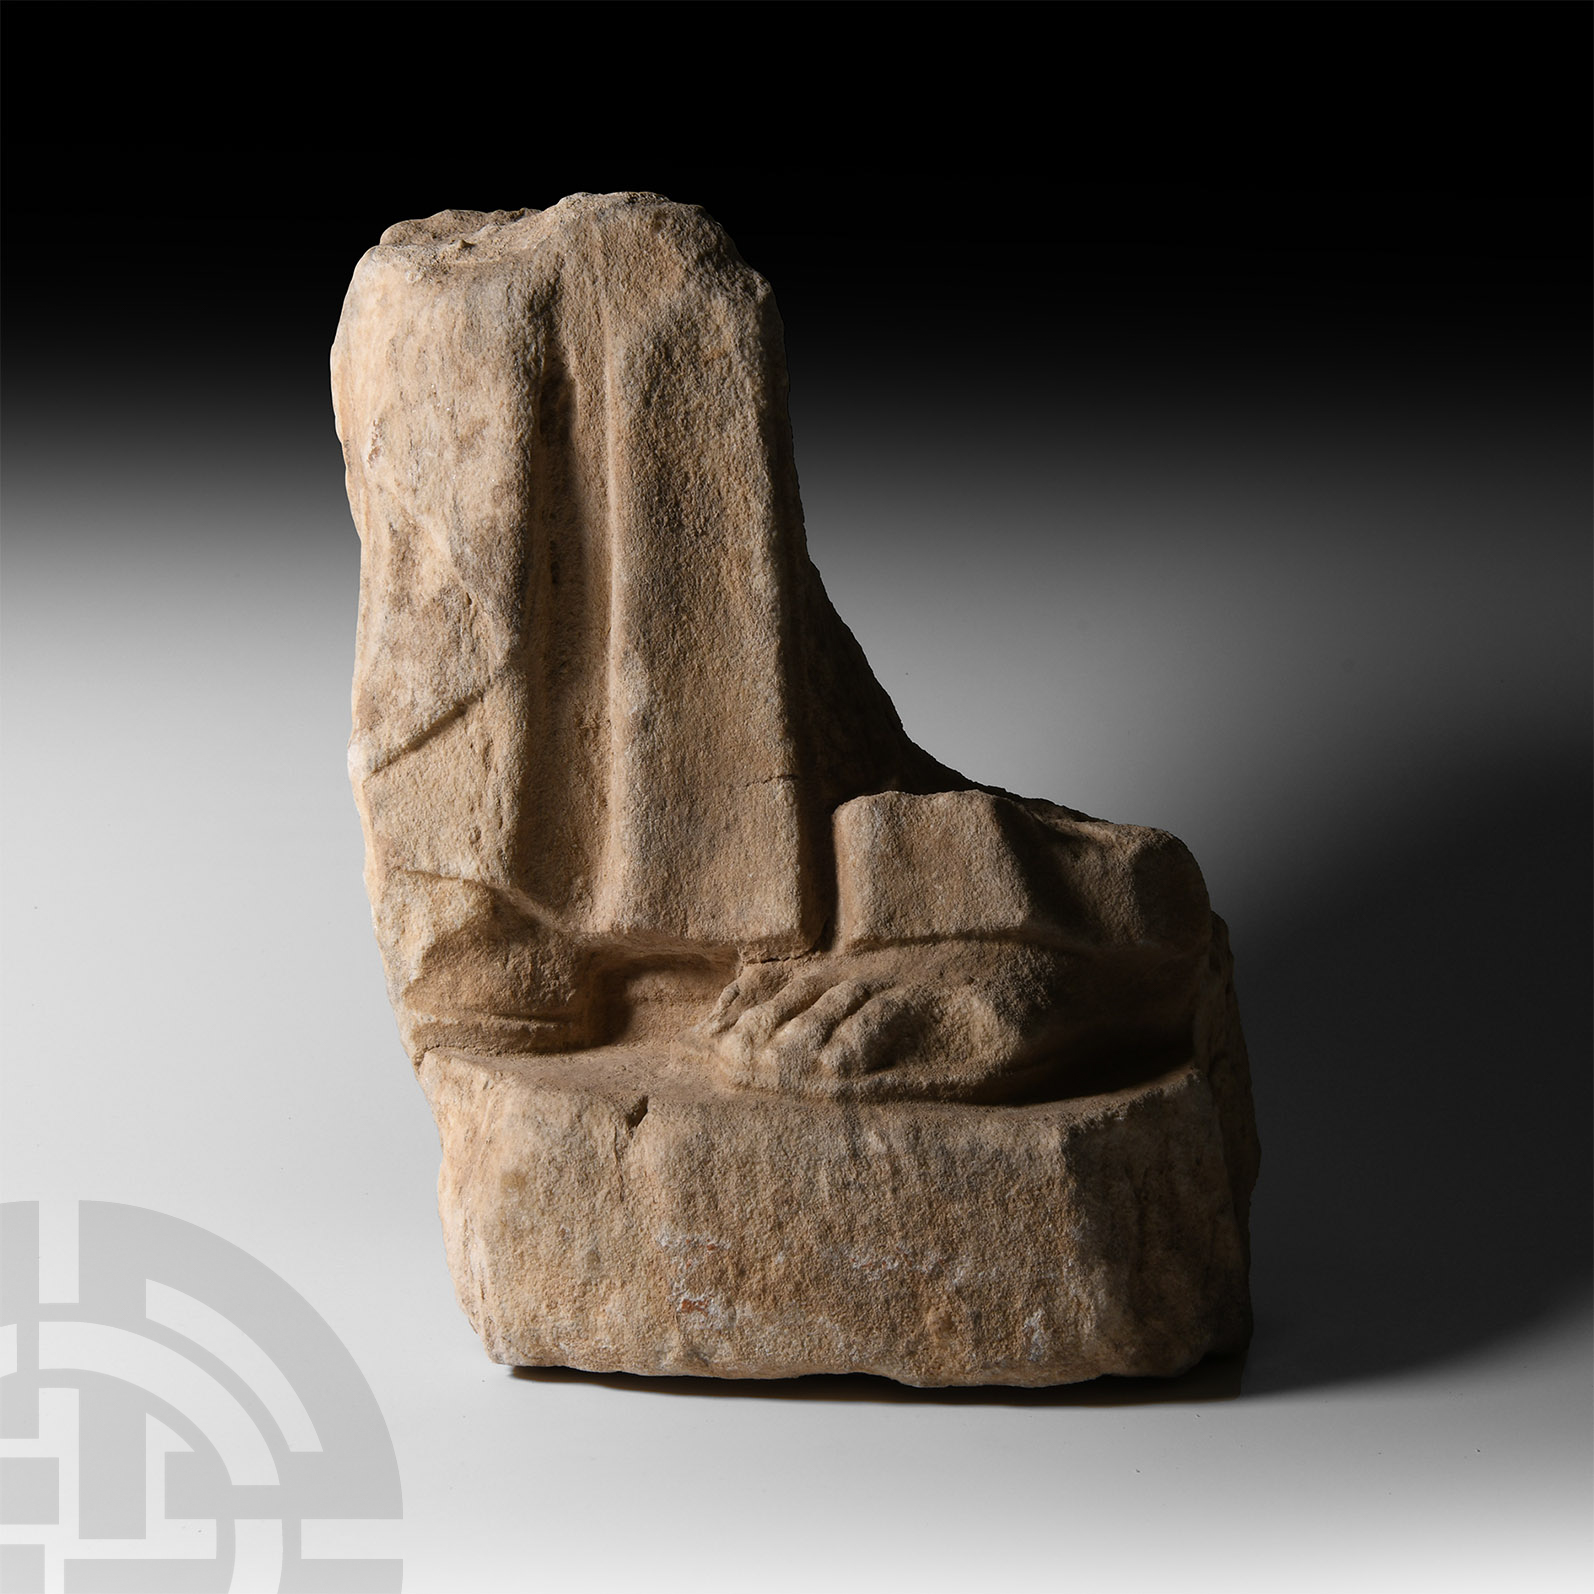 Roman Marble Statue Fragment with Feet